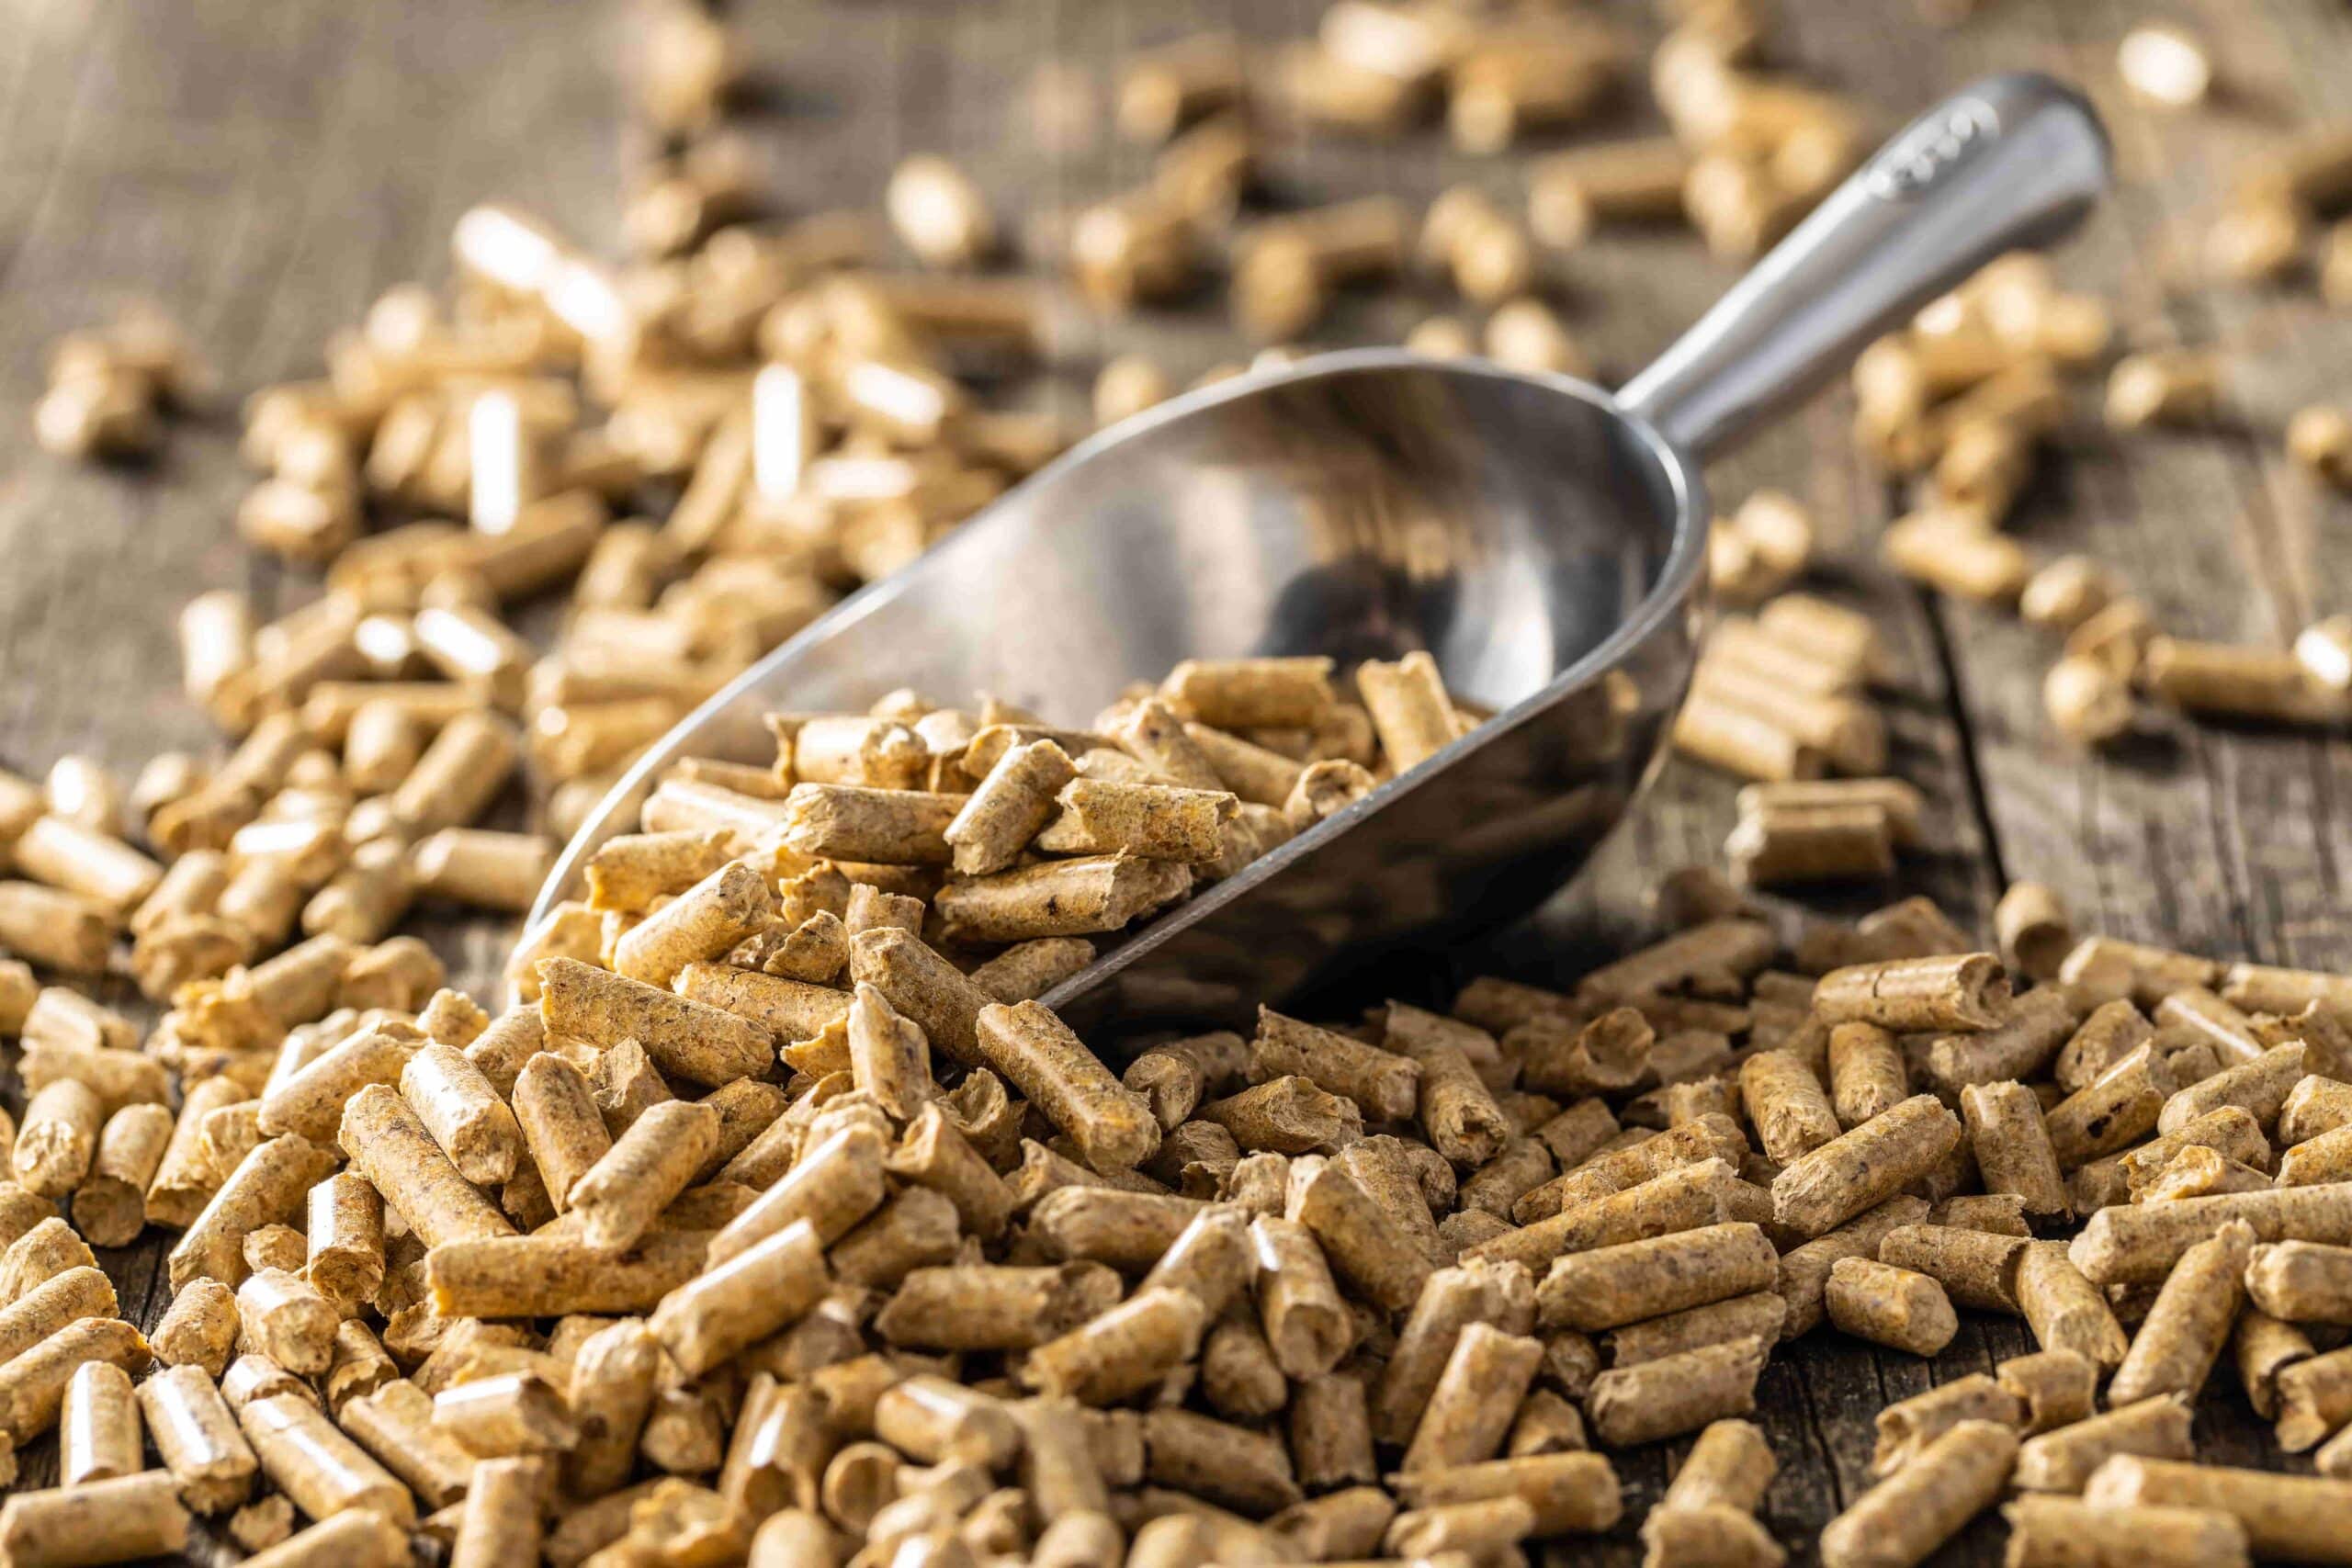 Wood Chips Vs Wood Pellets for Your Biomass Boiler—What’s Best?